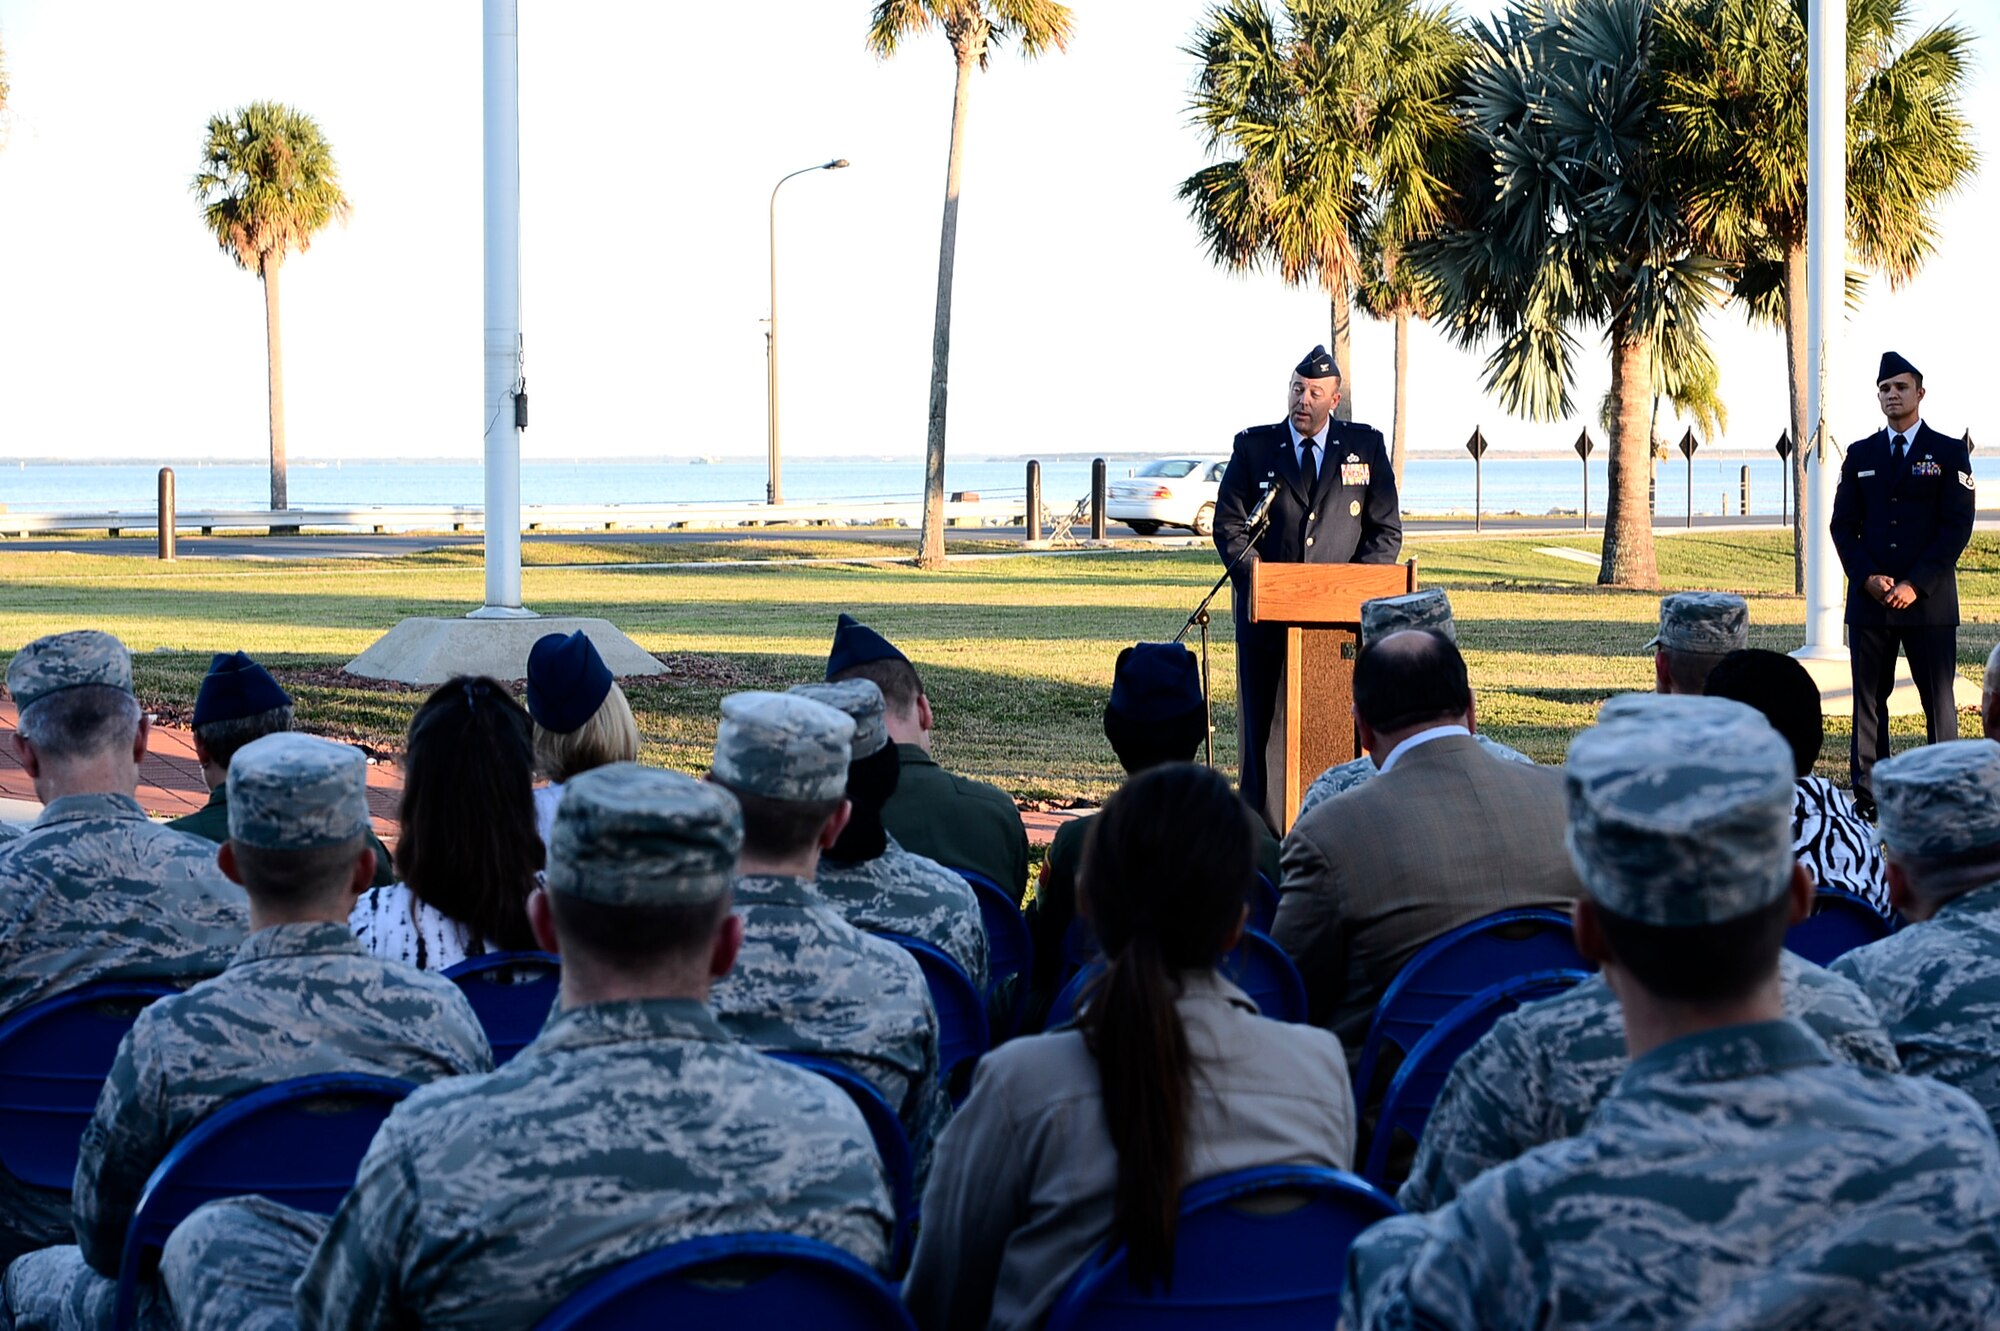 Col. Patrick Miller, commander of the 6th Mission Support Group, provides remarks during a Veterans Day Ceremony at MacDill Air Force Base, Fla., Nov. 10, 2016. On June 1, 1954, November 11 became a day to honor American veterans of all wars. (U.S. Air Force photo by Senior Airman Tori Schultz)